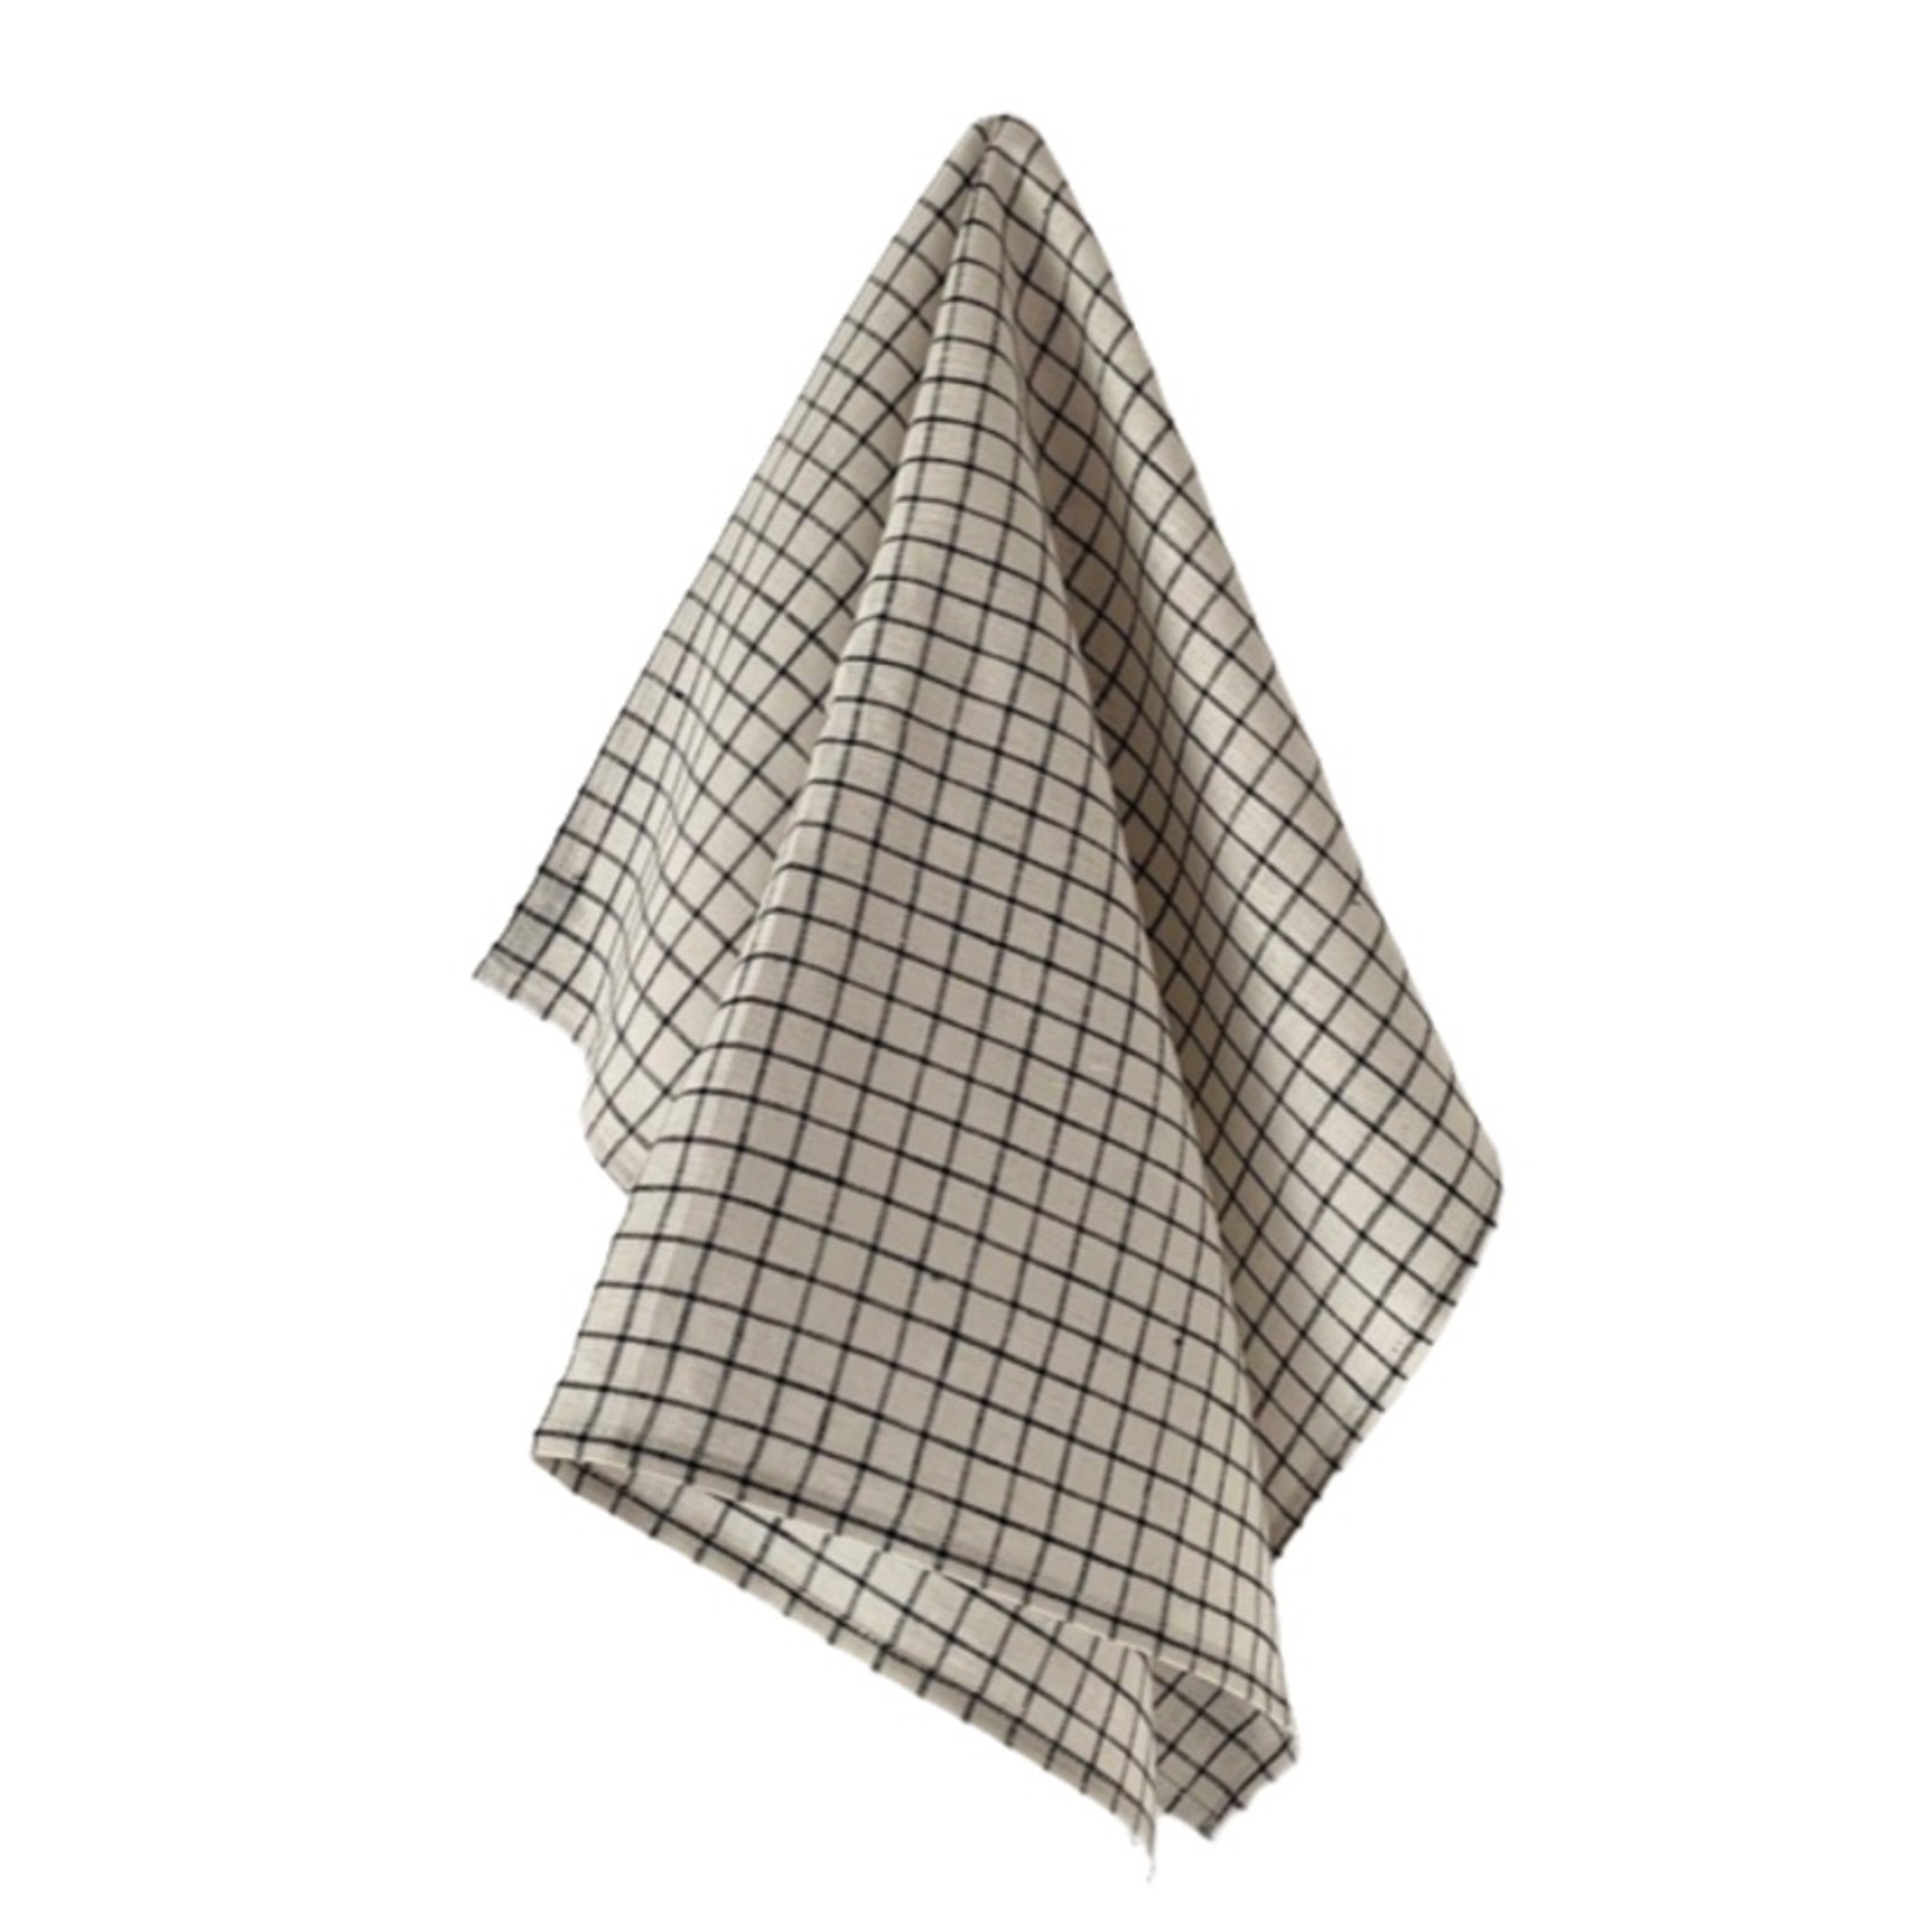 Fog Linen Tea Towel - Ivory with Navy Check